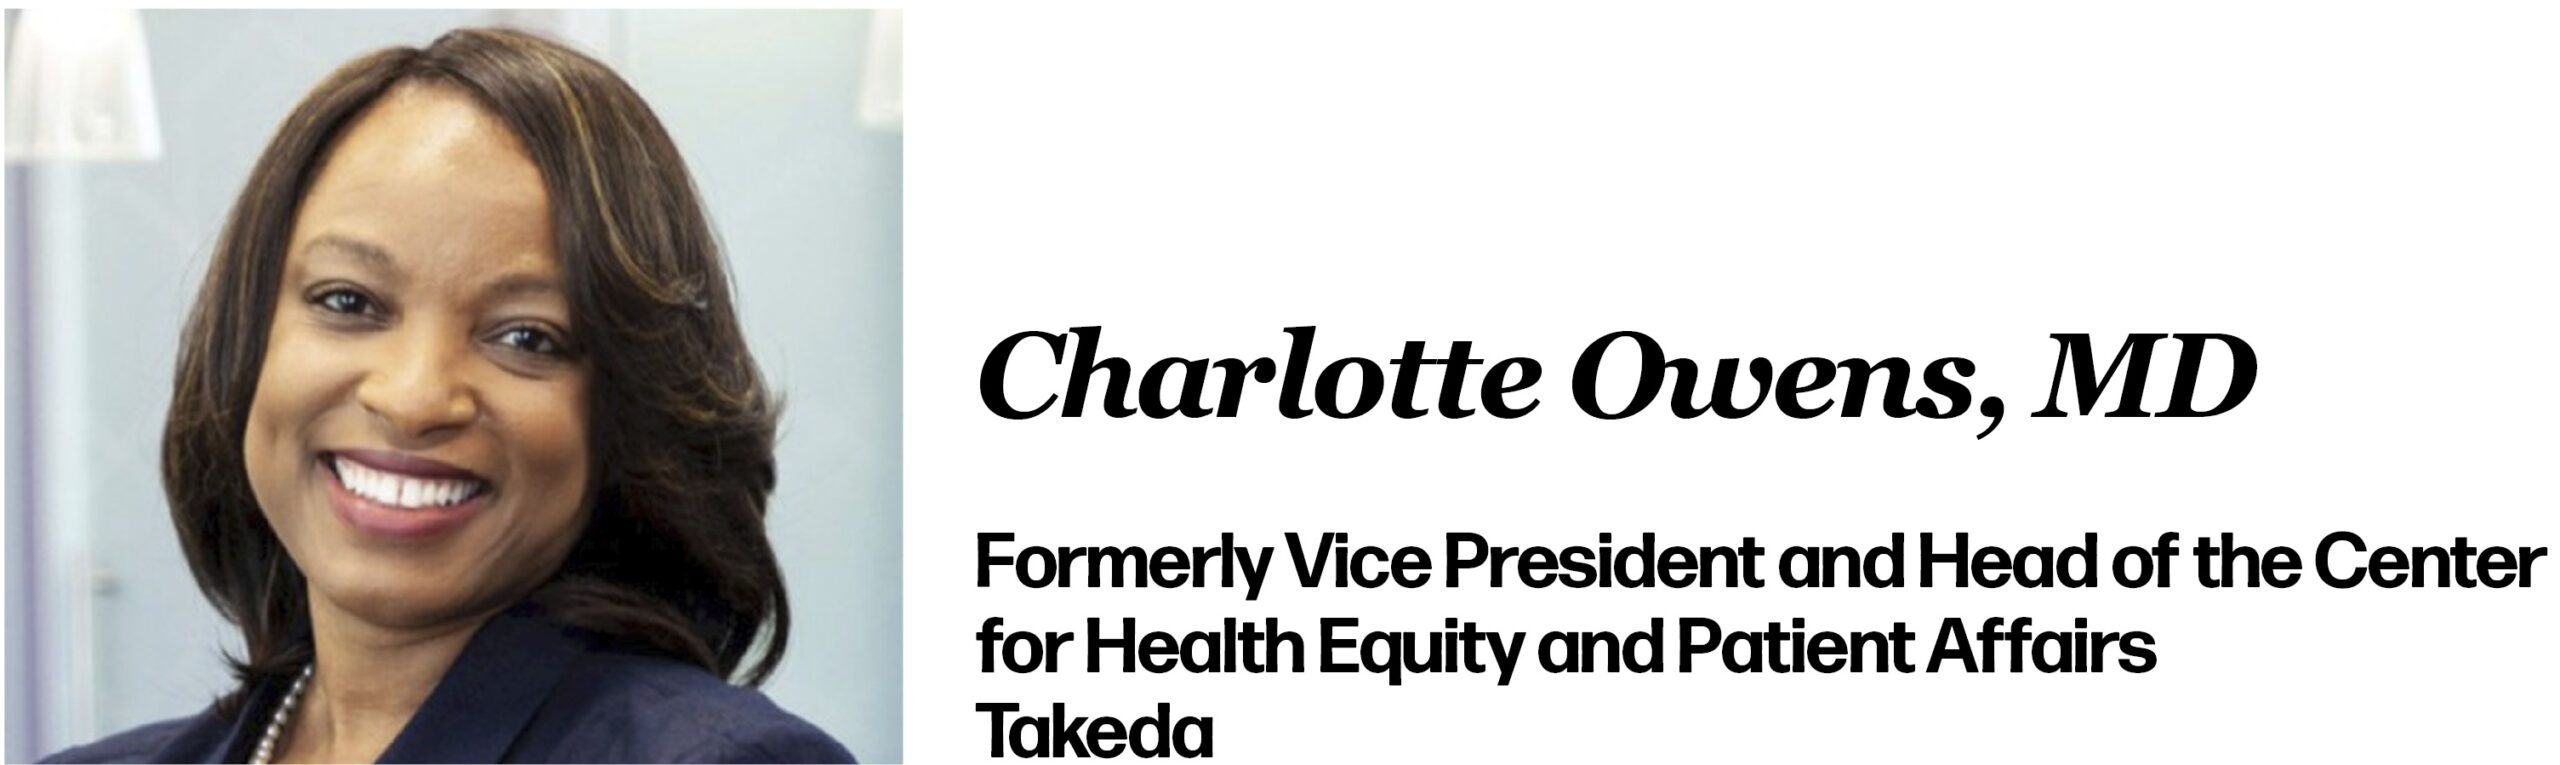 Charlotte Owens, MD Vice President and Head of the Center for Health Equity and Patient Affairs Takeda